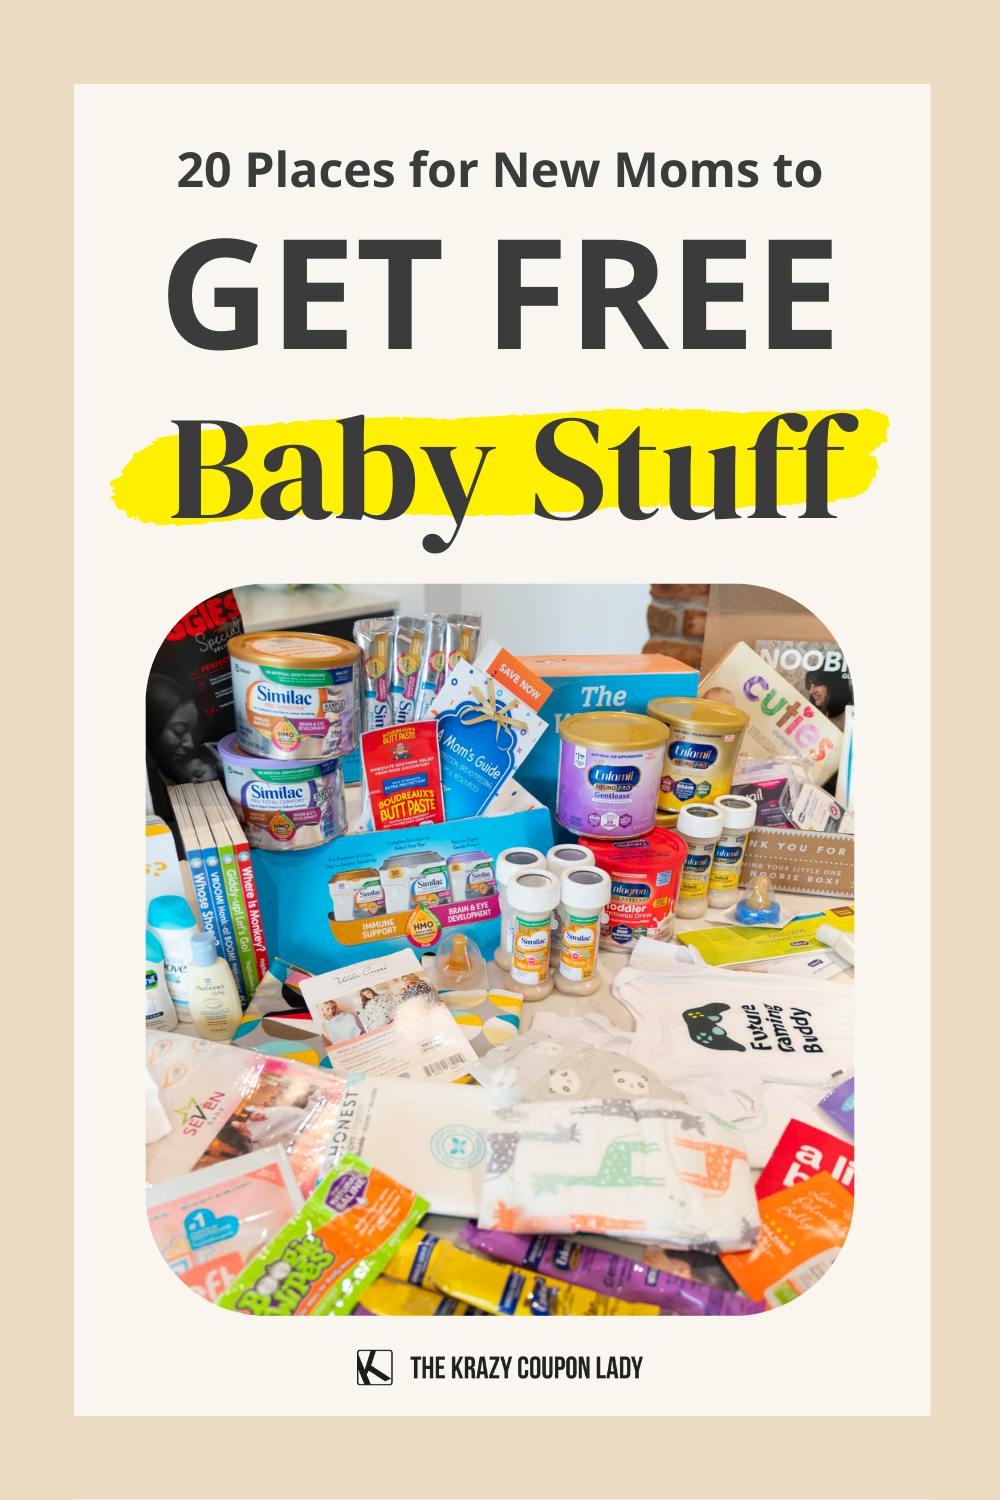 20 Places With Free Baby Stuff for New and Expecting Moms